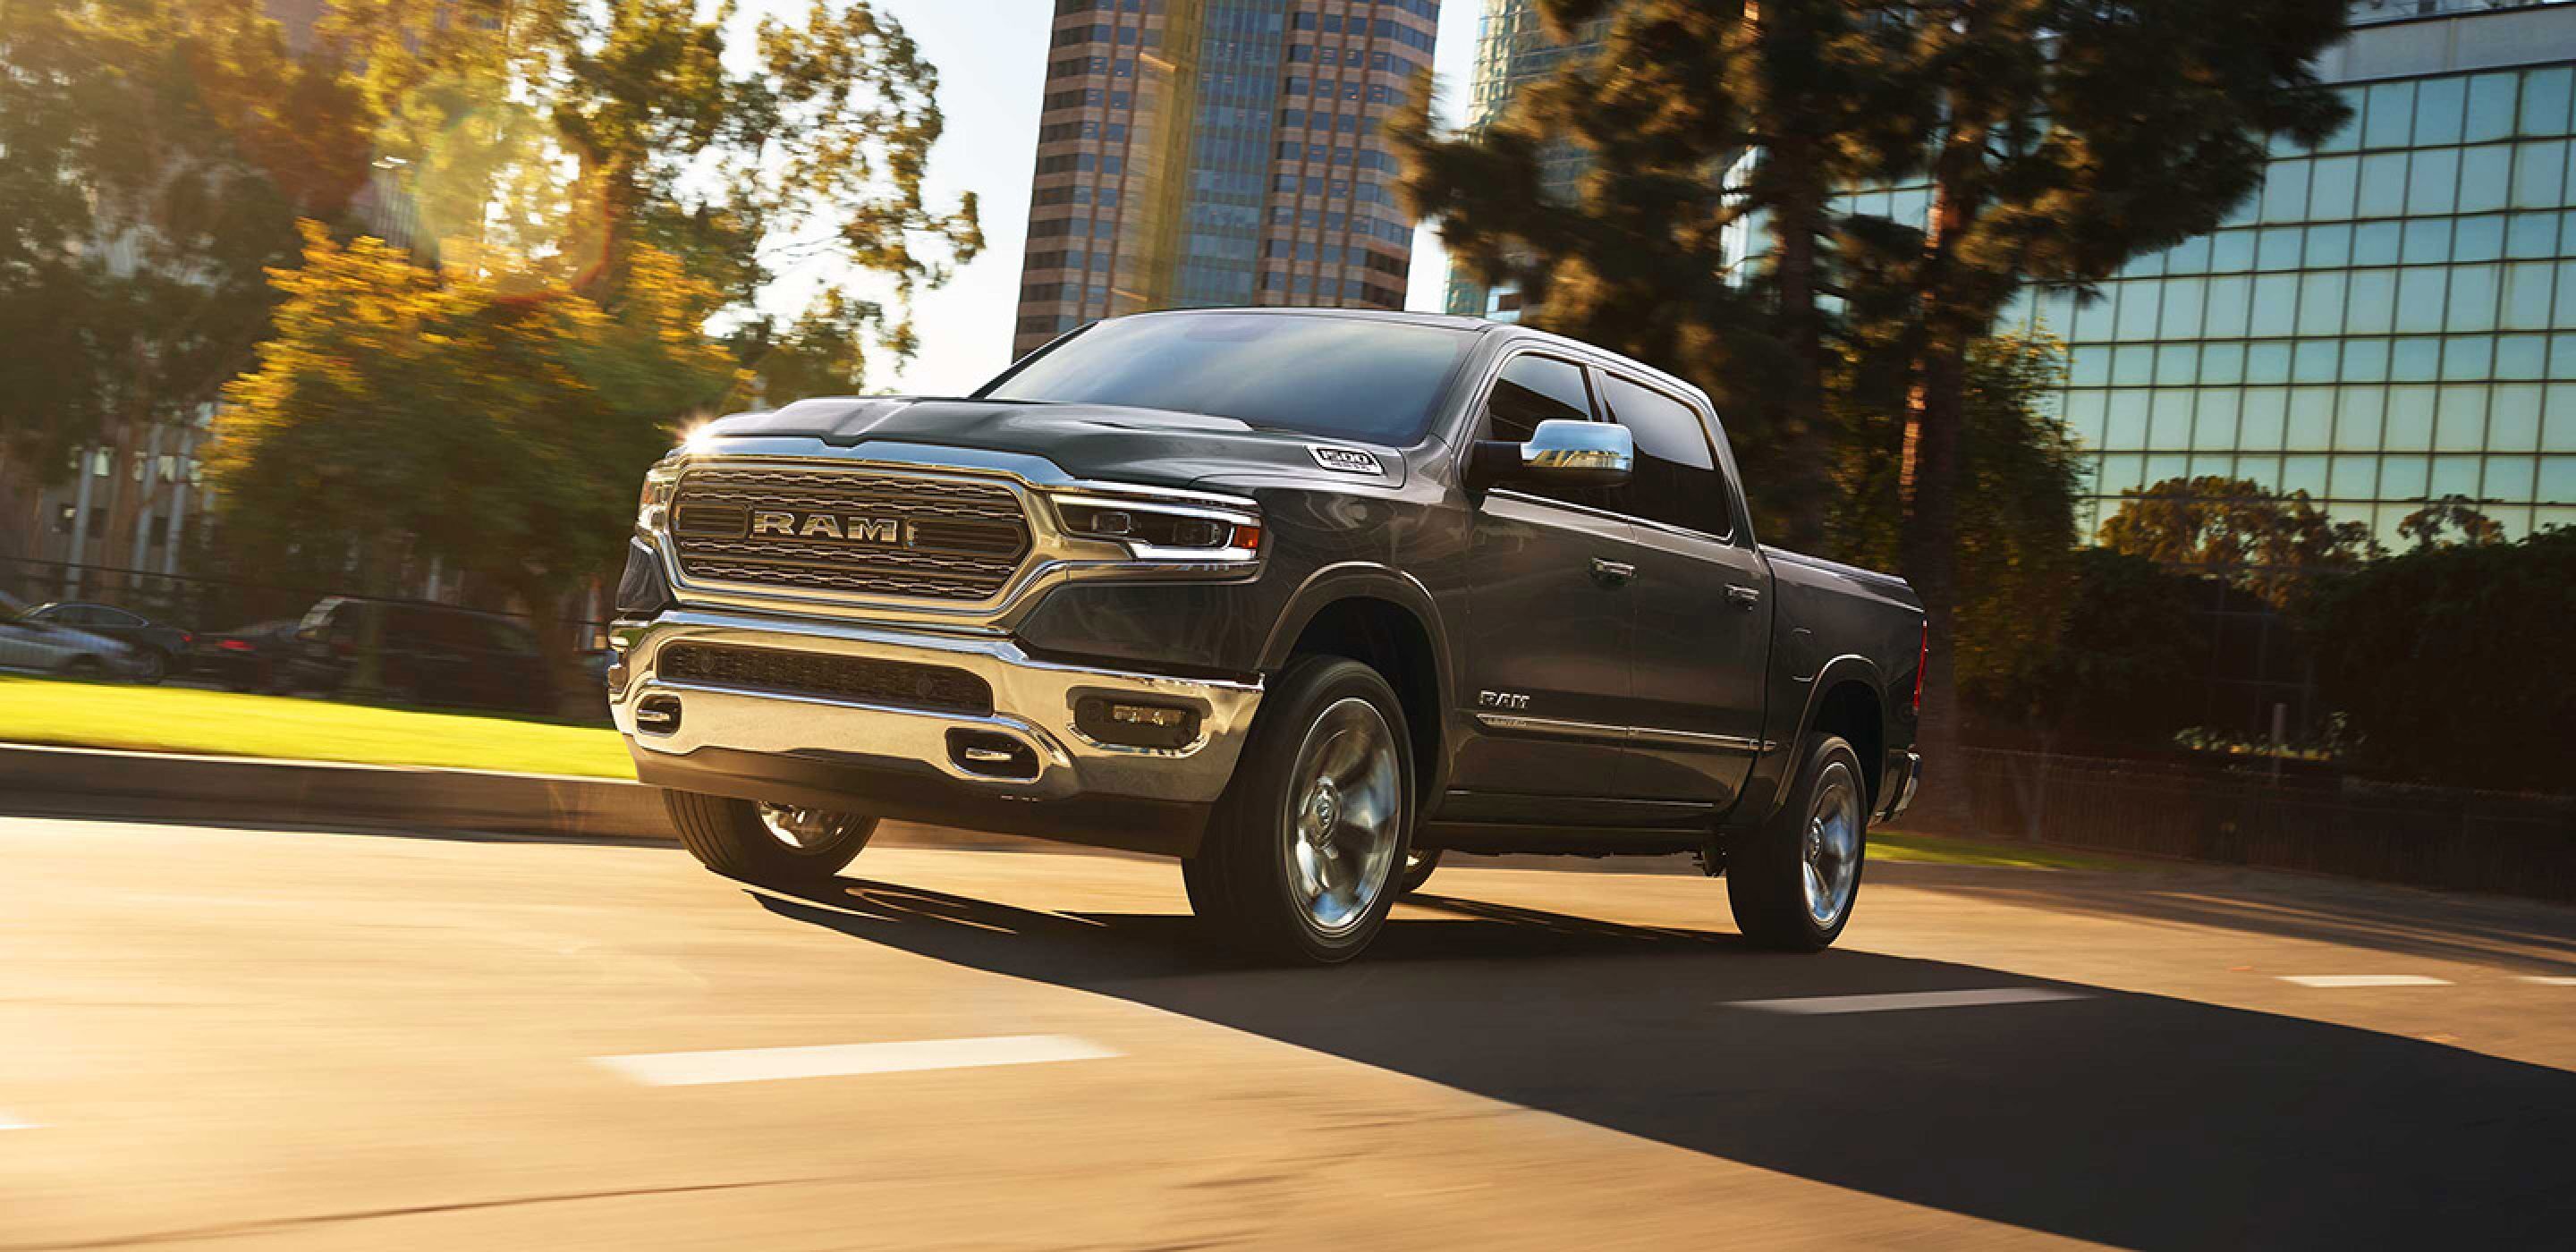 Landmark Dodge Chrysler Jeep Ram Blog Landmark Dodge Landmark Dodge - to be able to stay competitive in the u s truck market the battle regarding torque and towing capacity has been in full swing for quite some time now